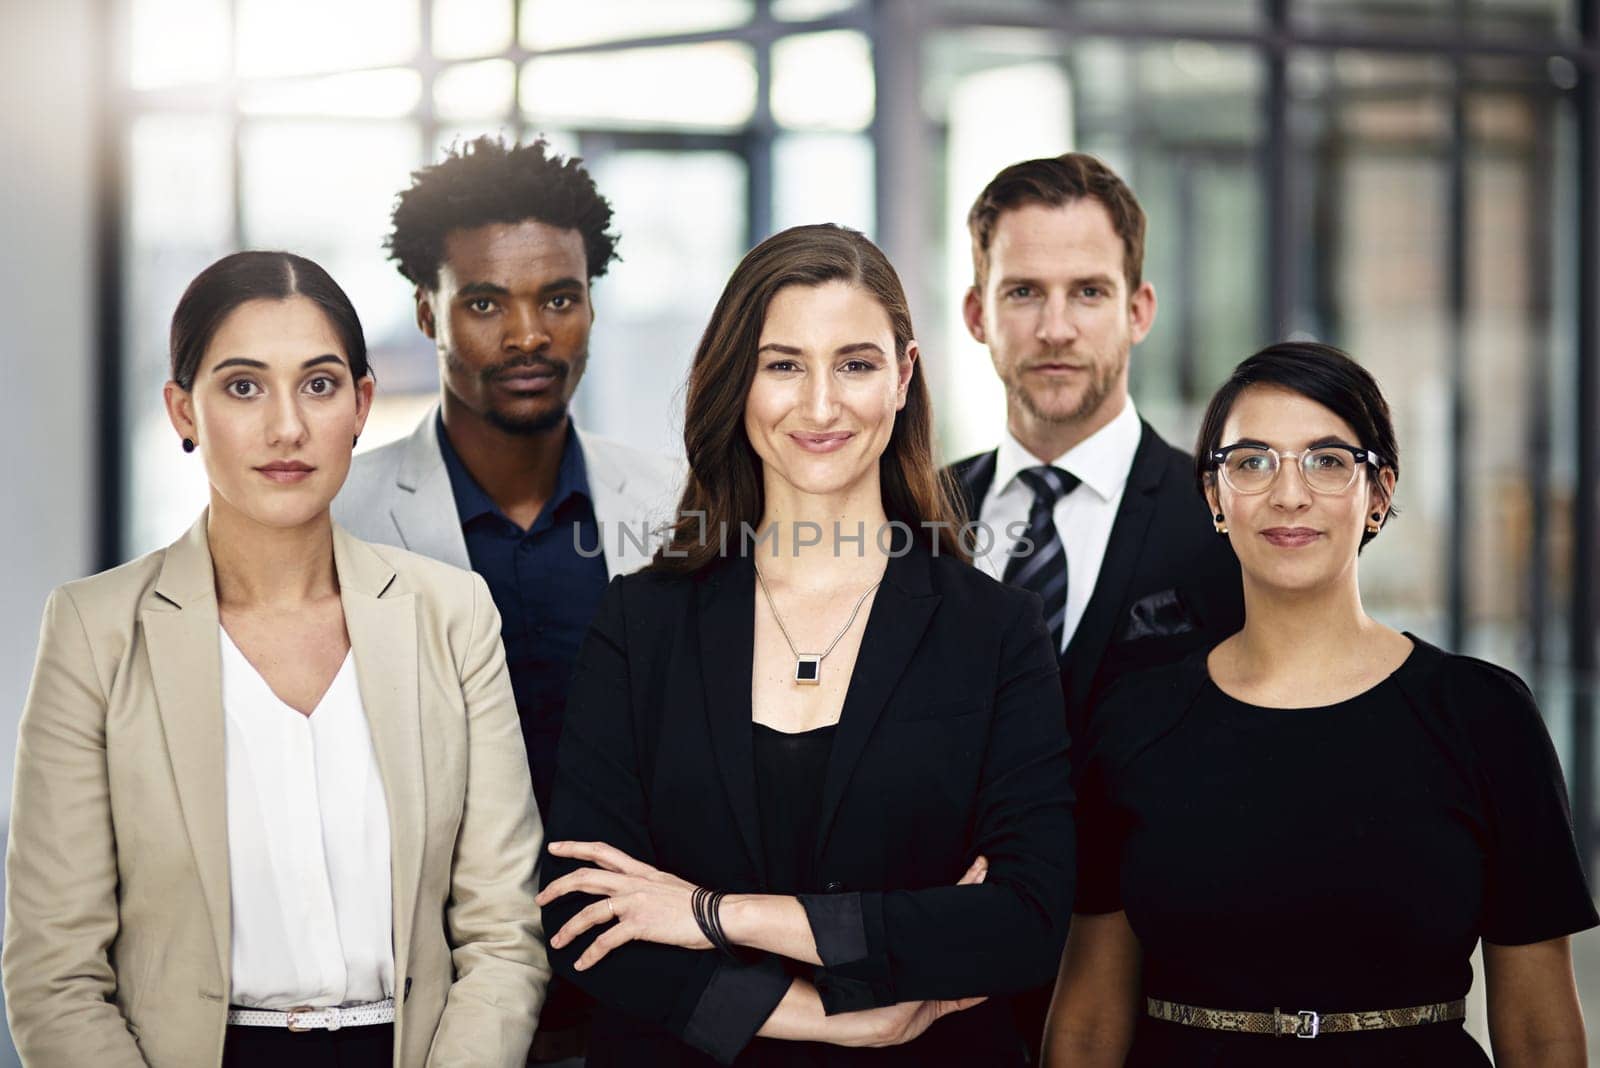 Business people, portrait and group with teamwork, diversity and cooperation with corporate professional. Legal aid, attorney and lawyer in modern office, confidence and collaboration with support by YuriArcurs